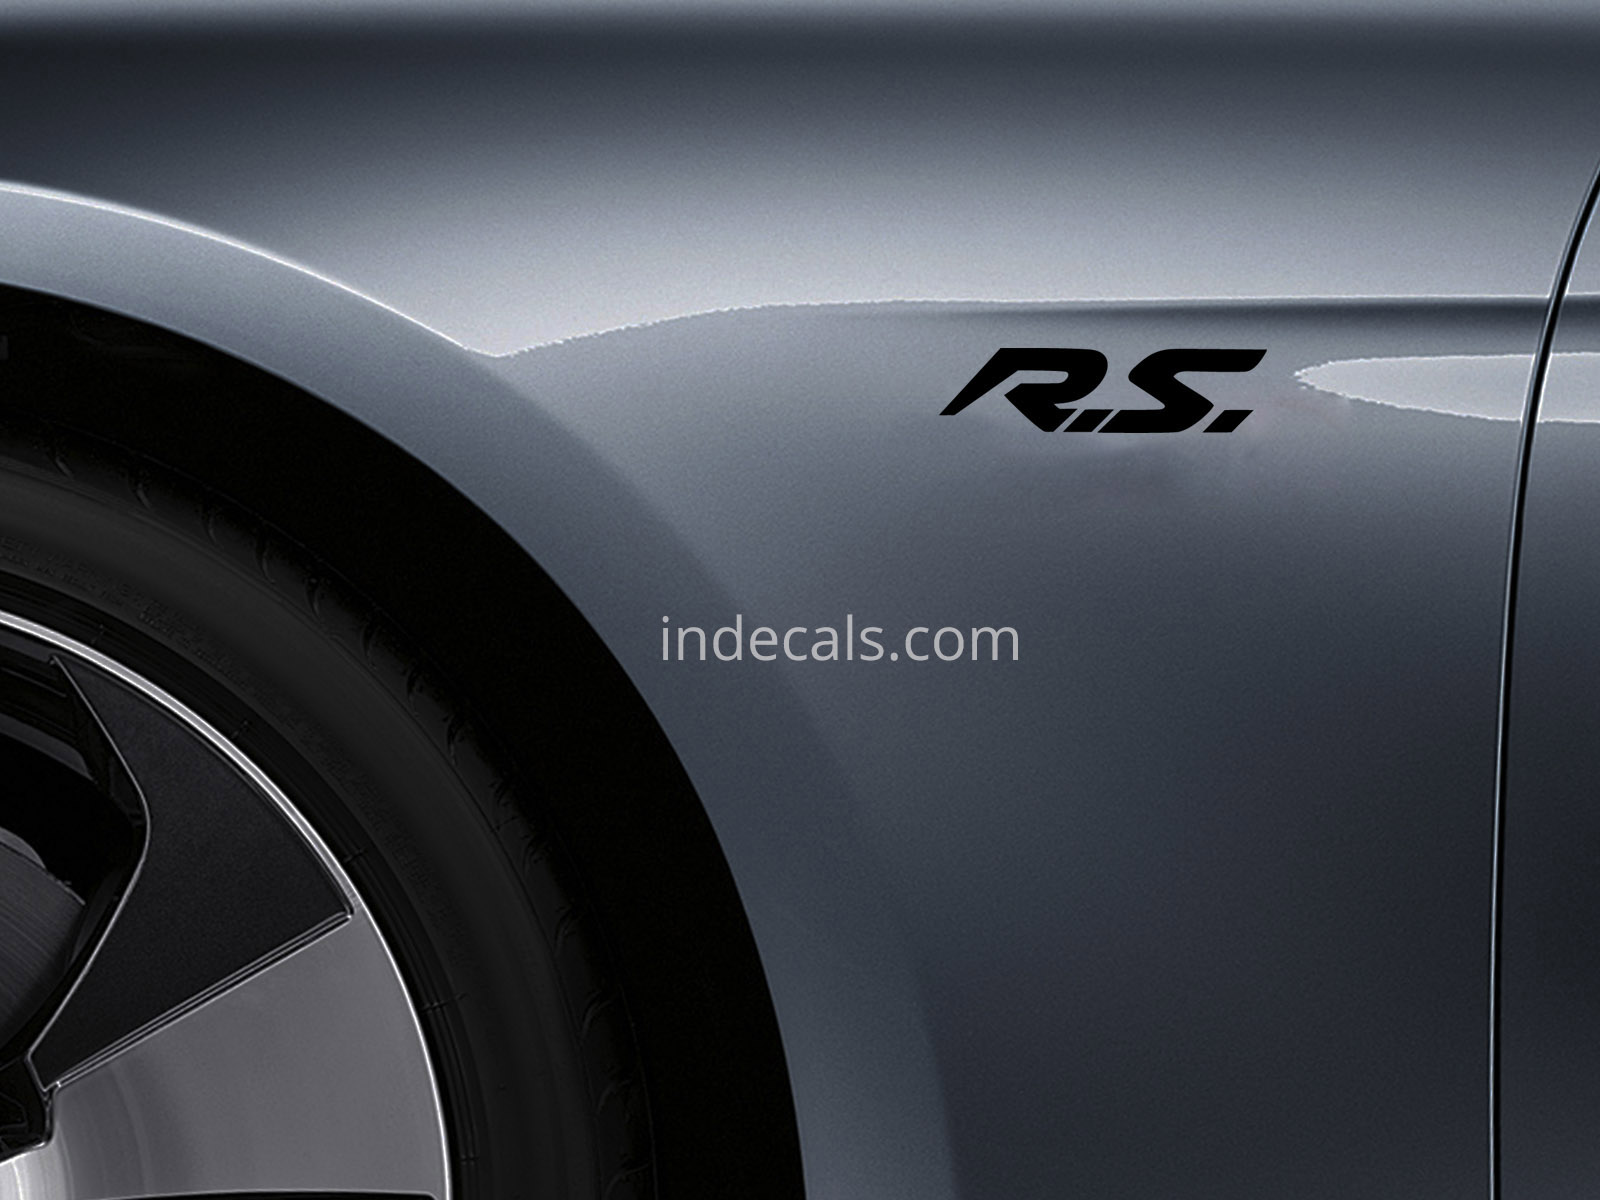 3 x Renault RS Stickers for Wings - Black